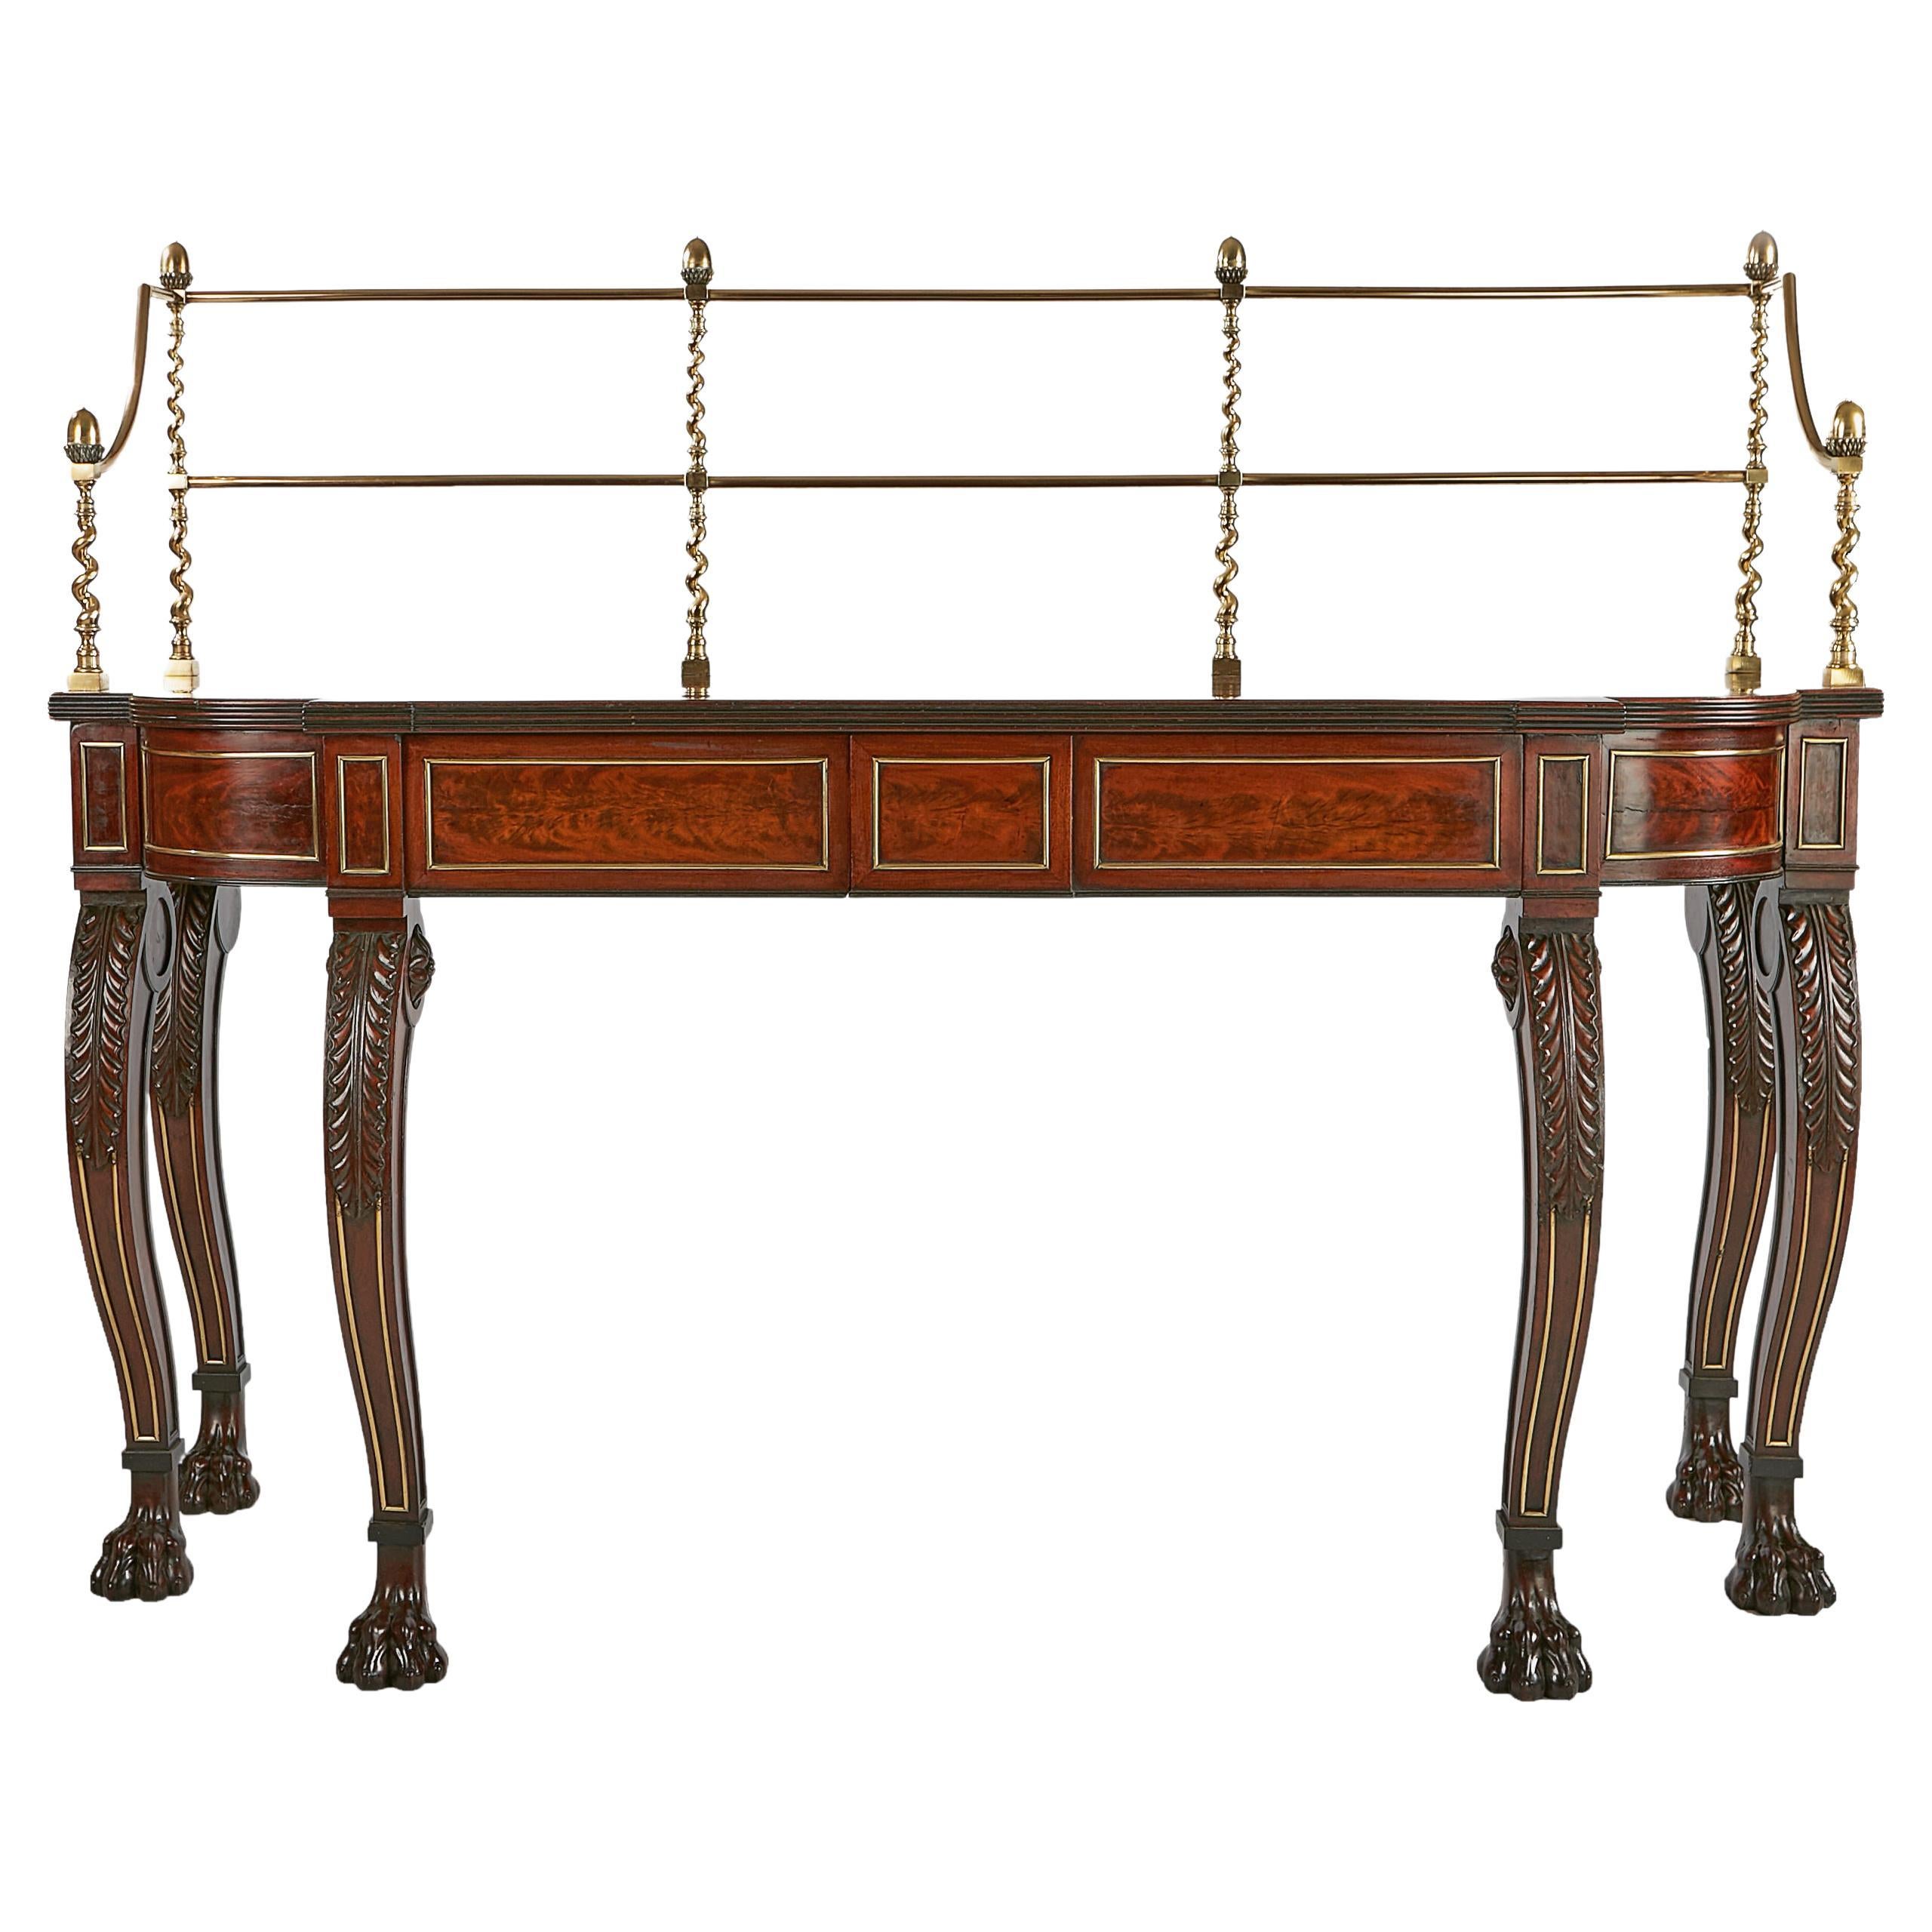 19th Century English Regency Console/Serving Table in the Manner of George Smith